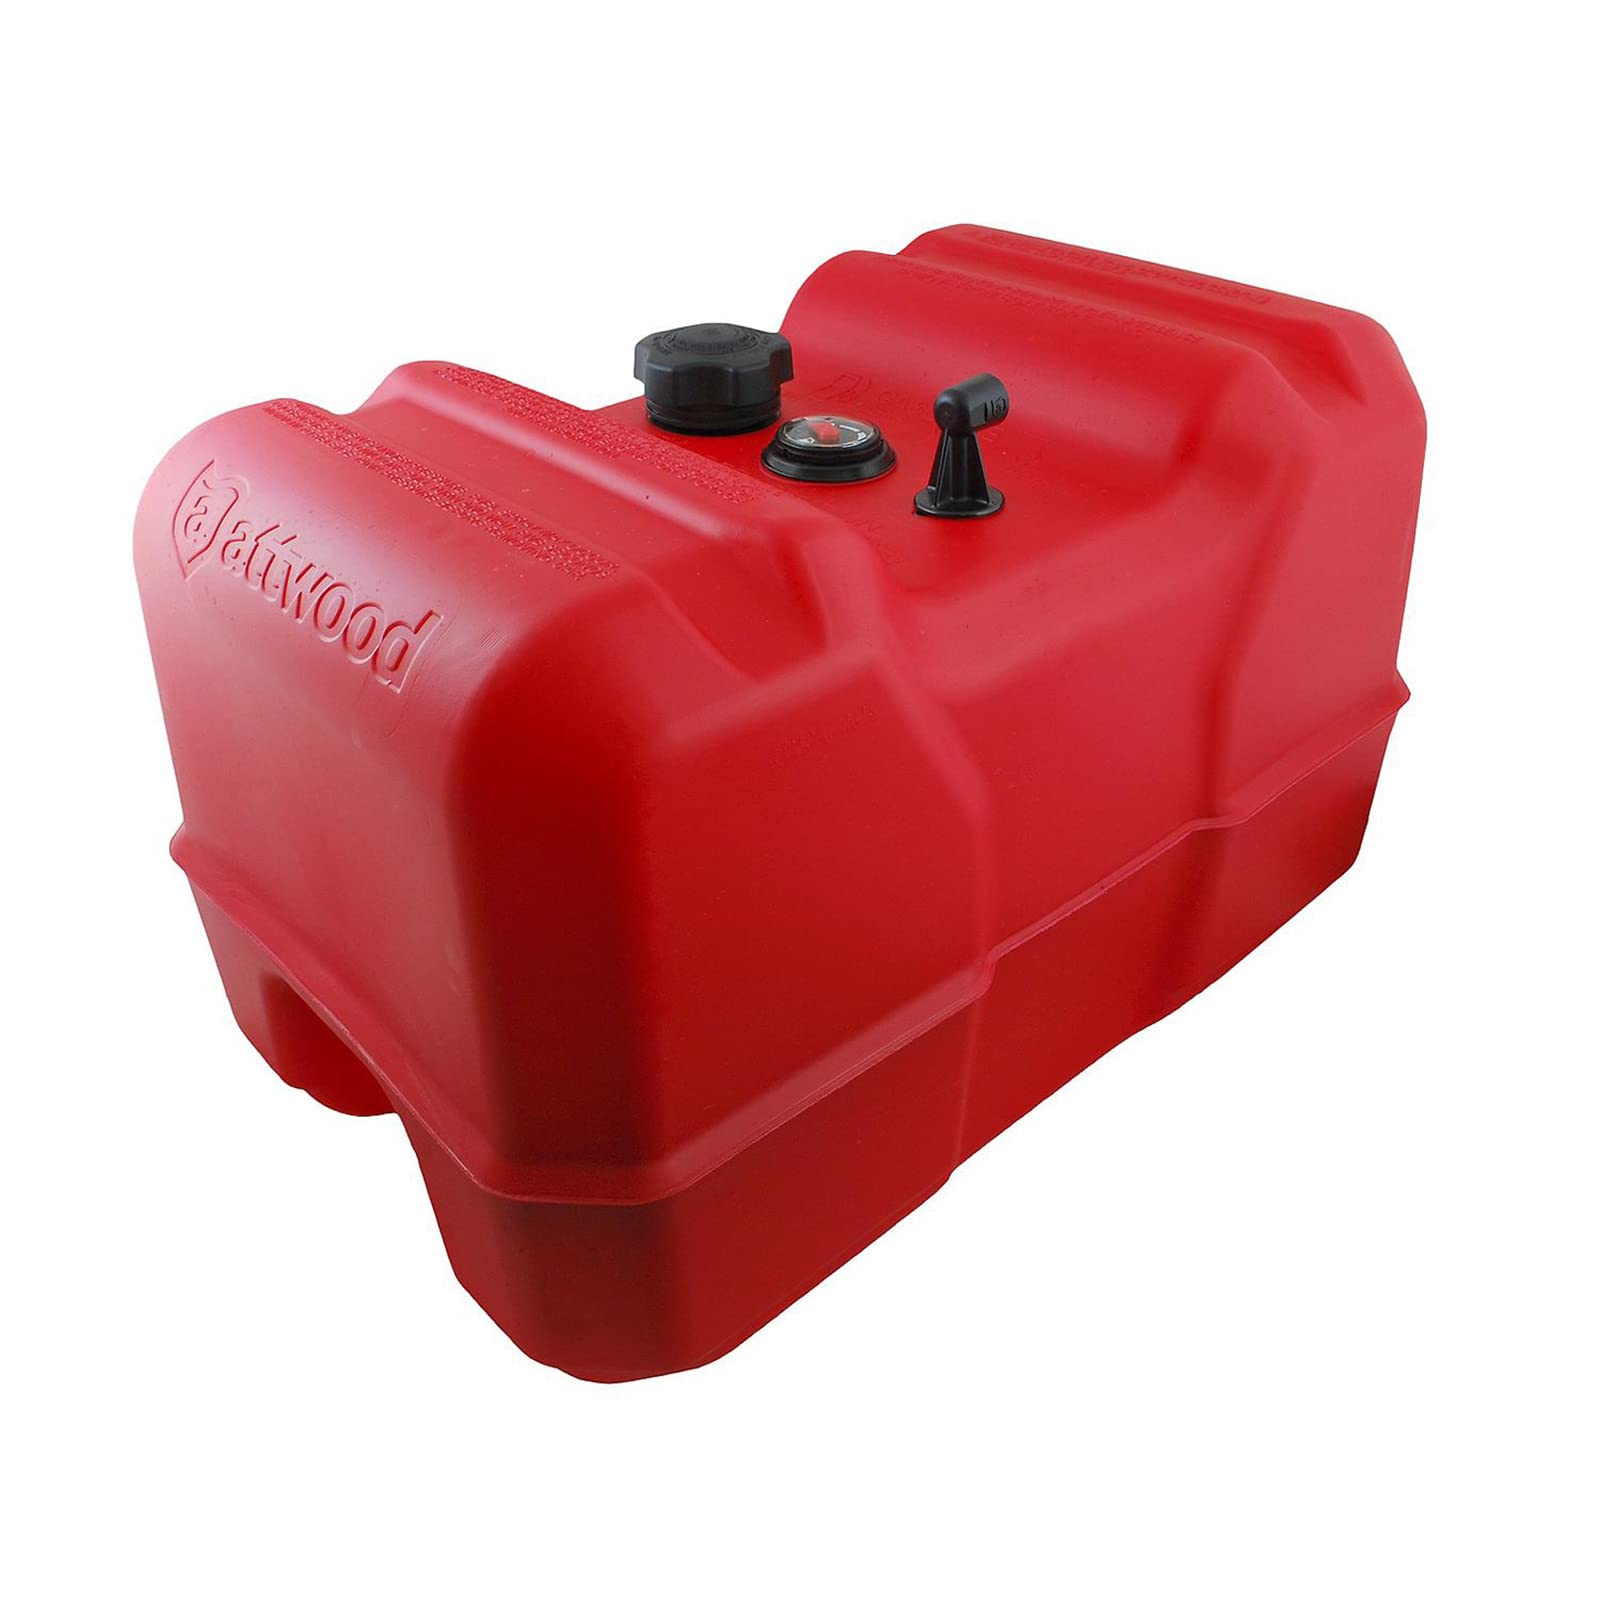 Attwood 8812LPG2 EPA Certified 12 Gallon Portable Fuel Tank with Gauge